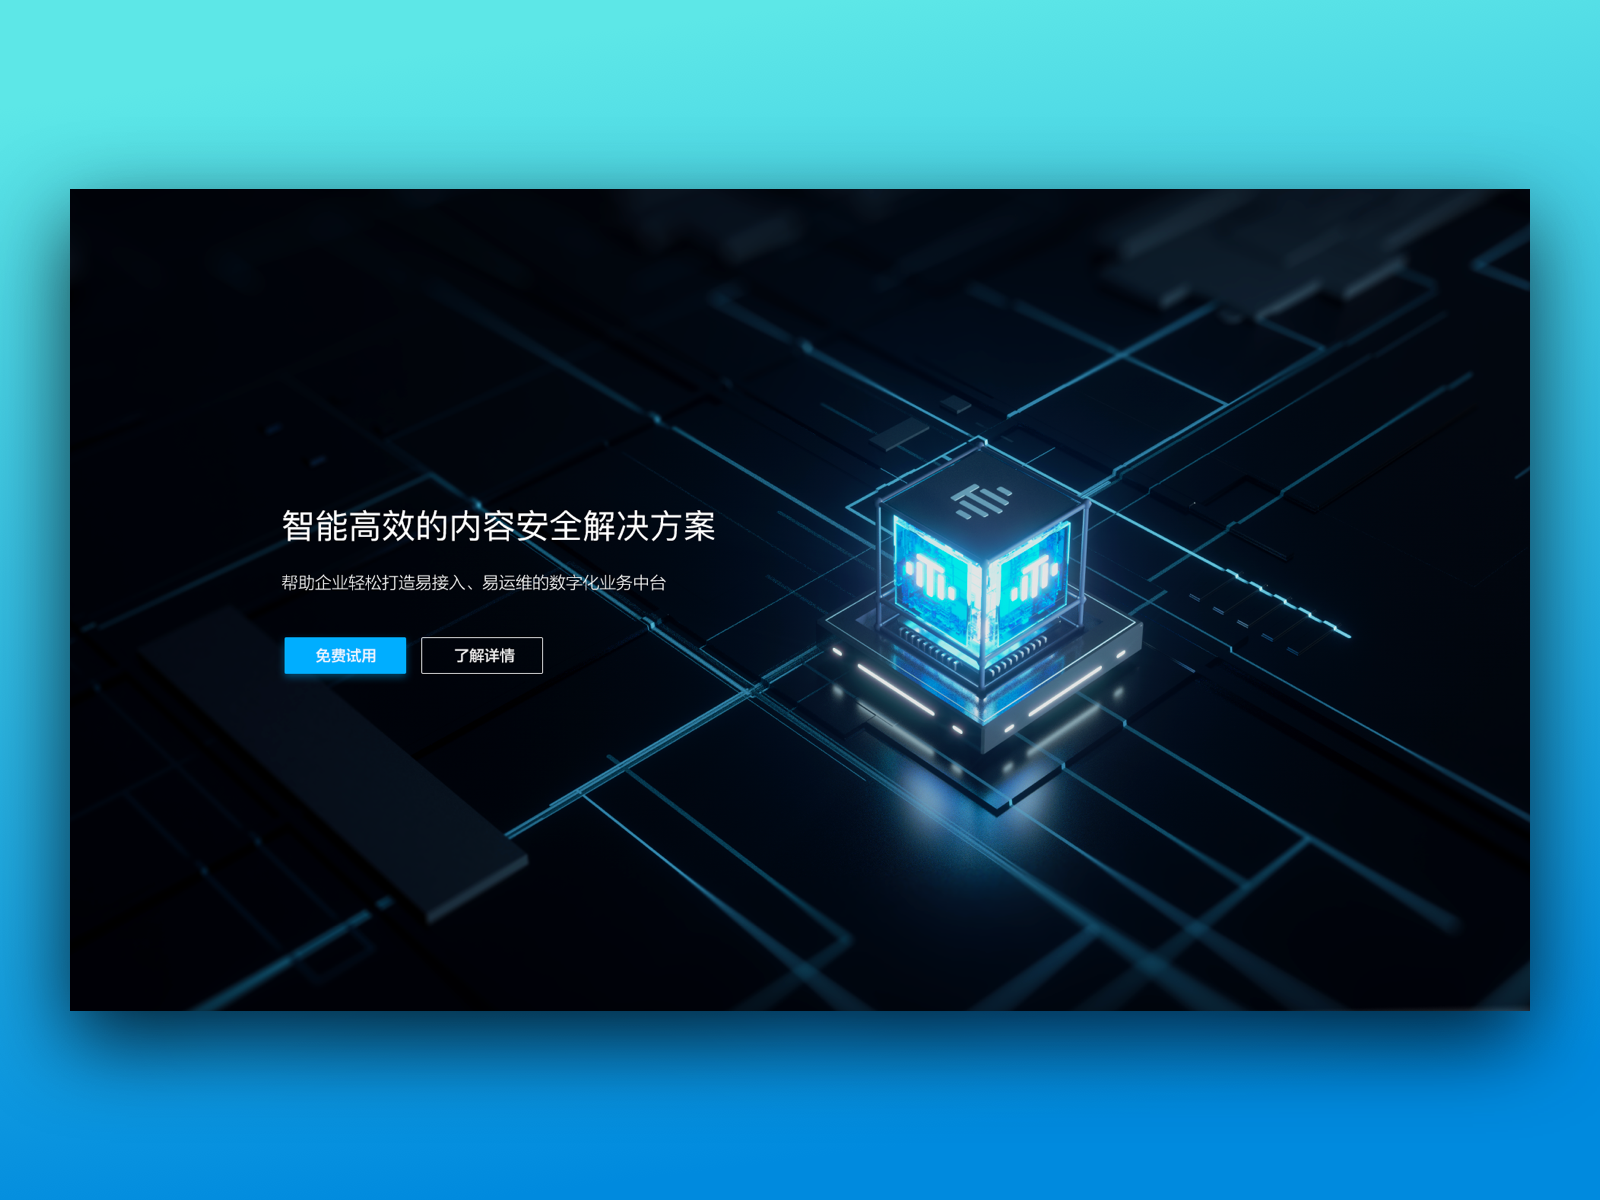 Ai Banner by Vincen文森 on Dribbble